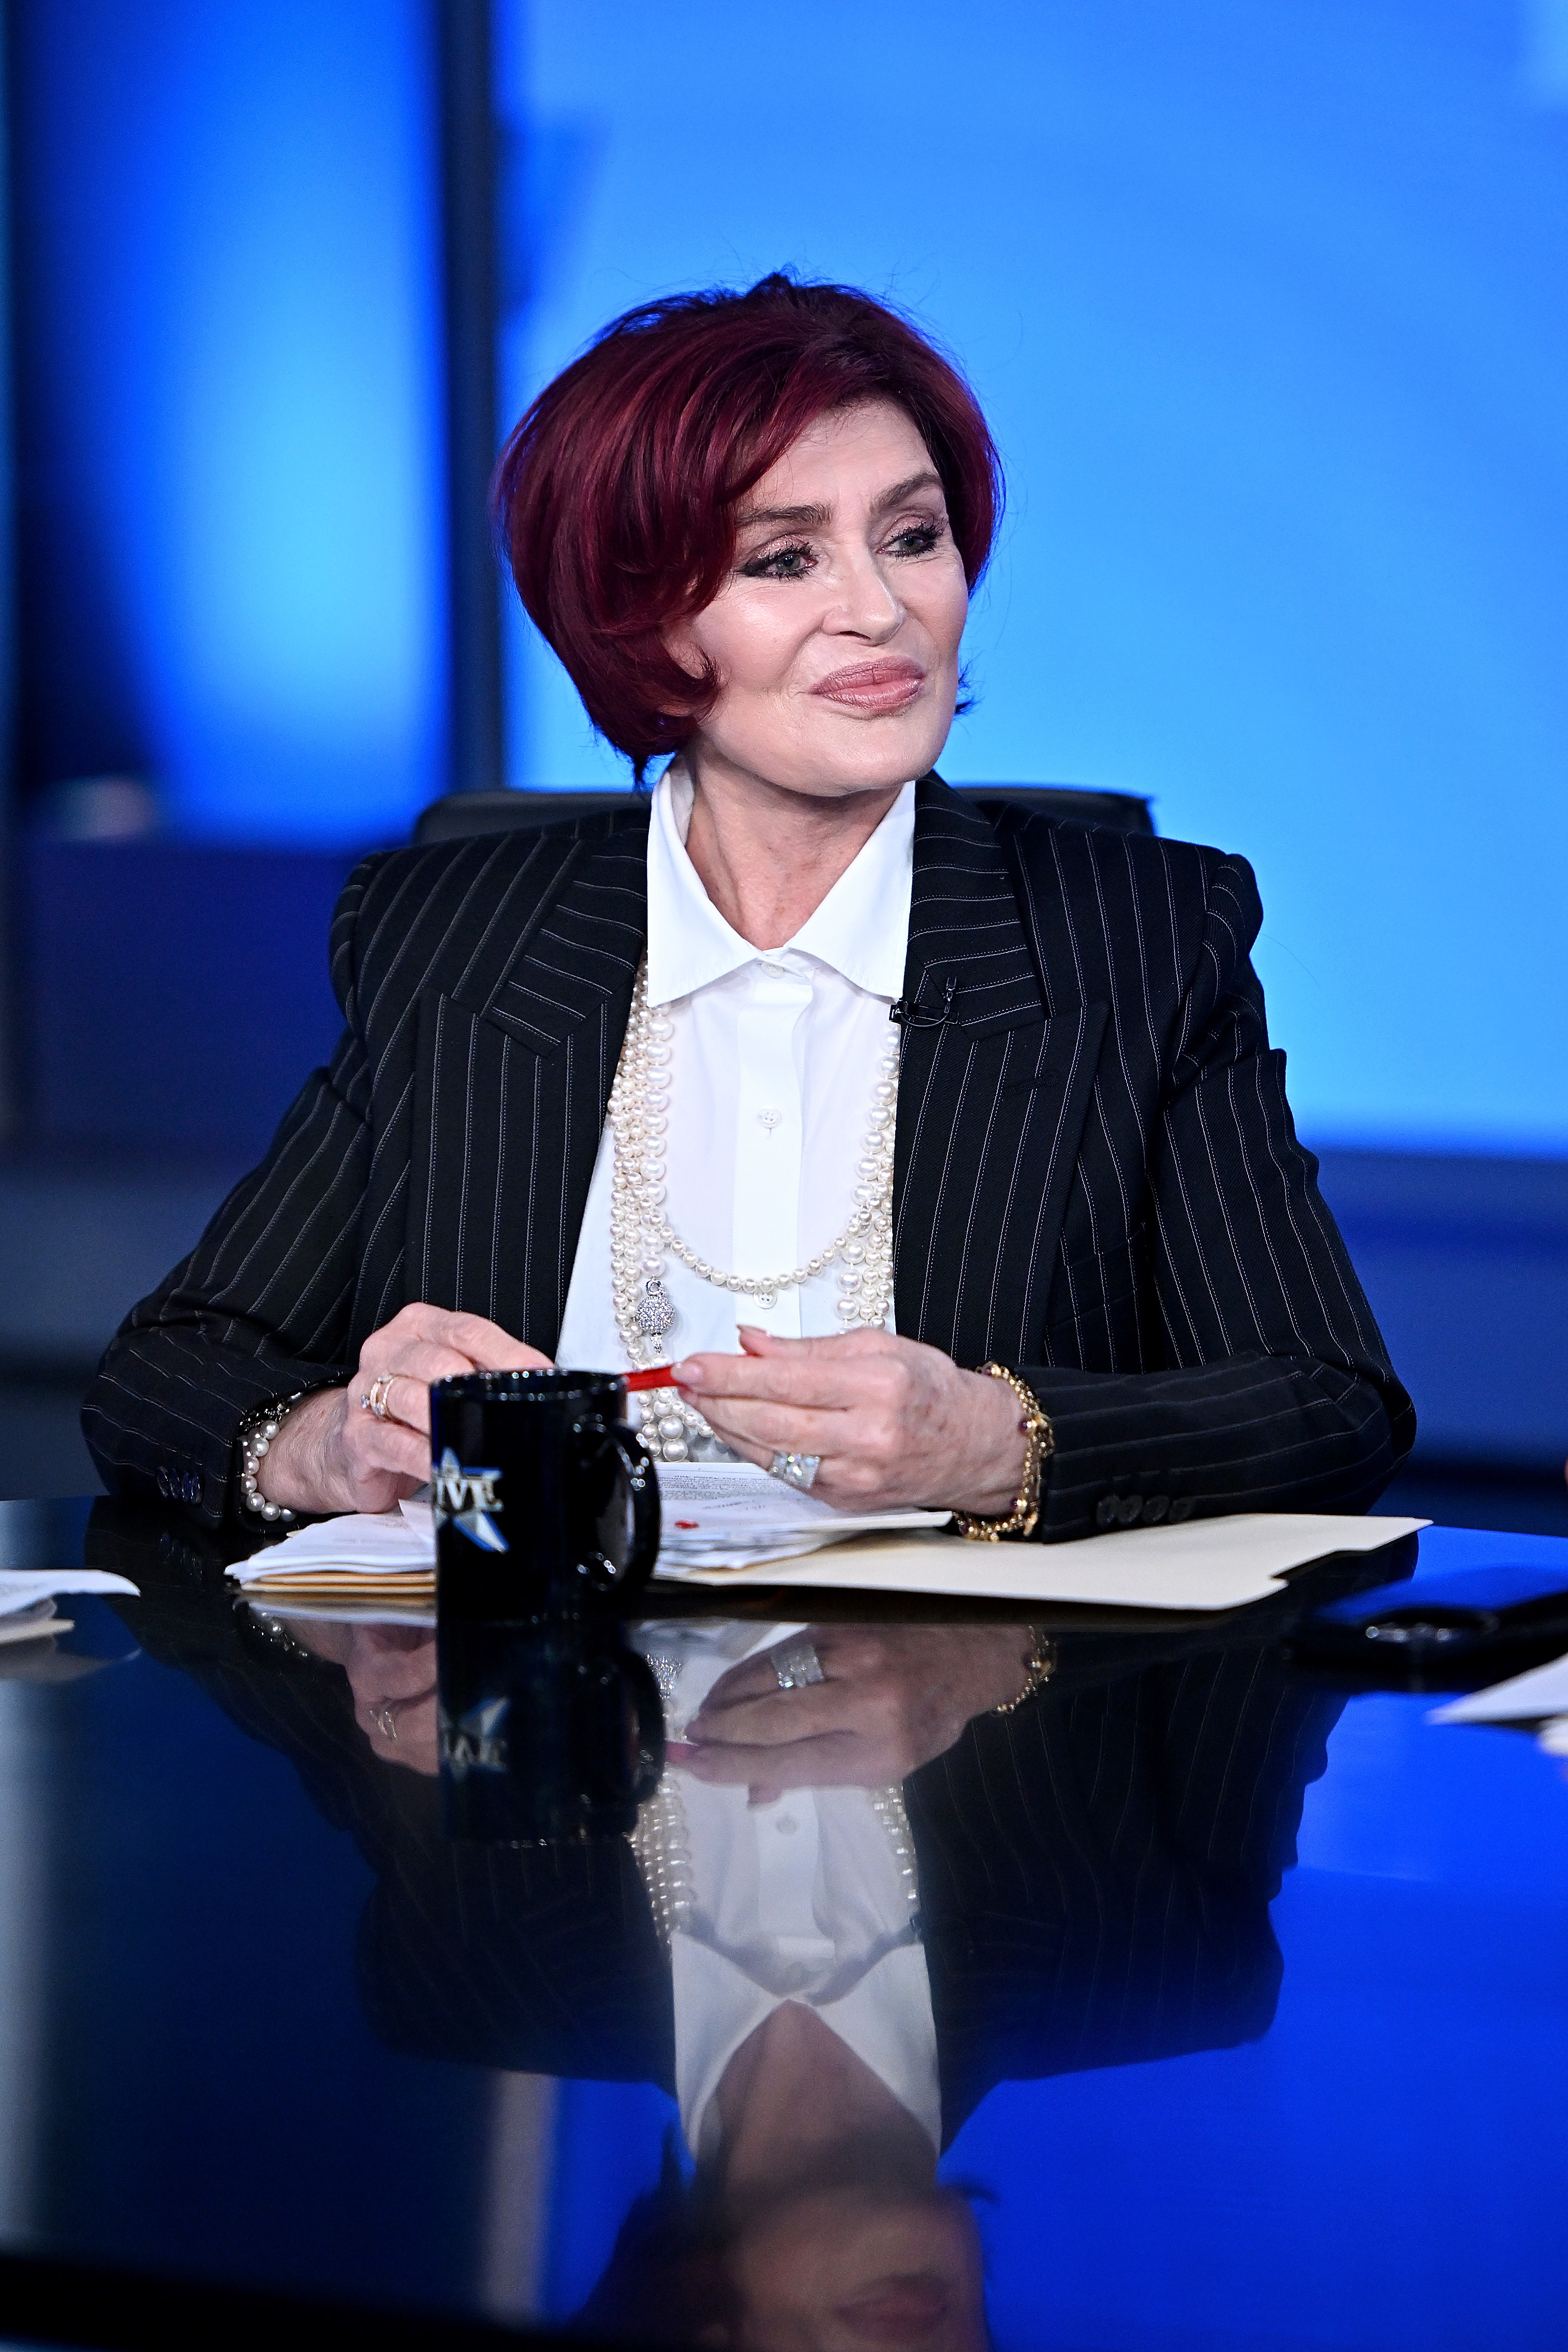 Sharon Osbourne seated at a desk wearing a pin-striped suit and layered necklaces